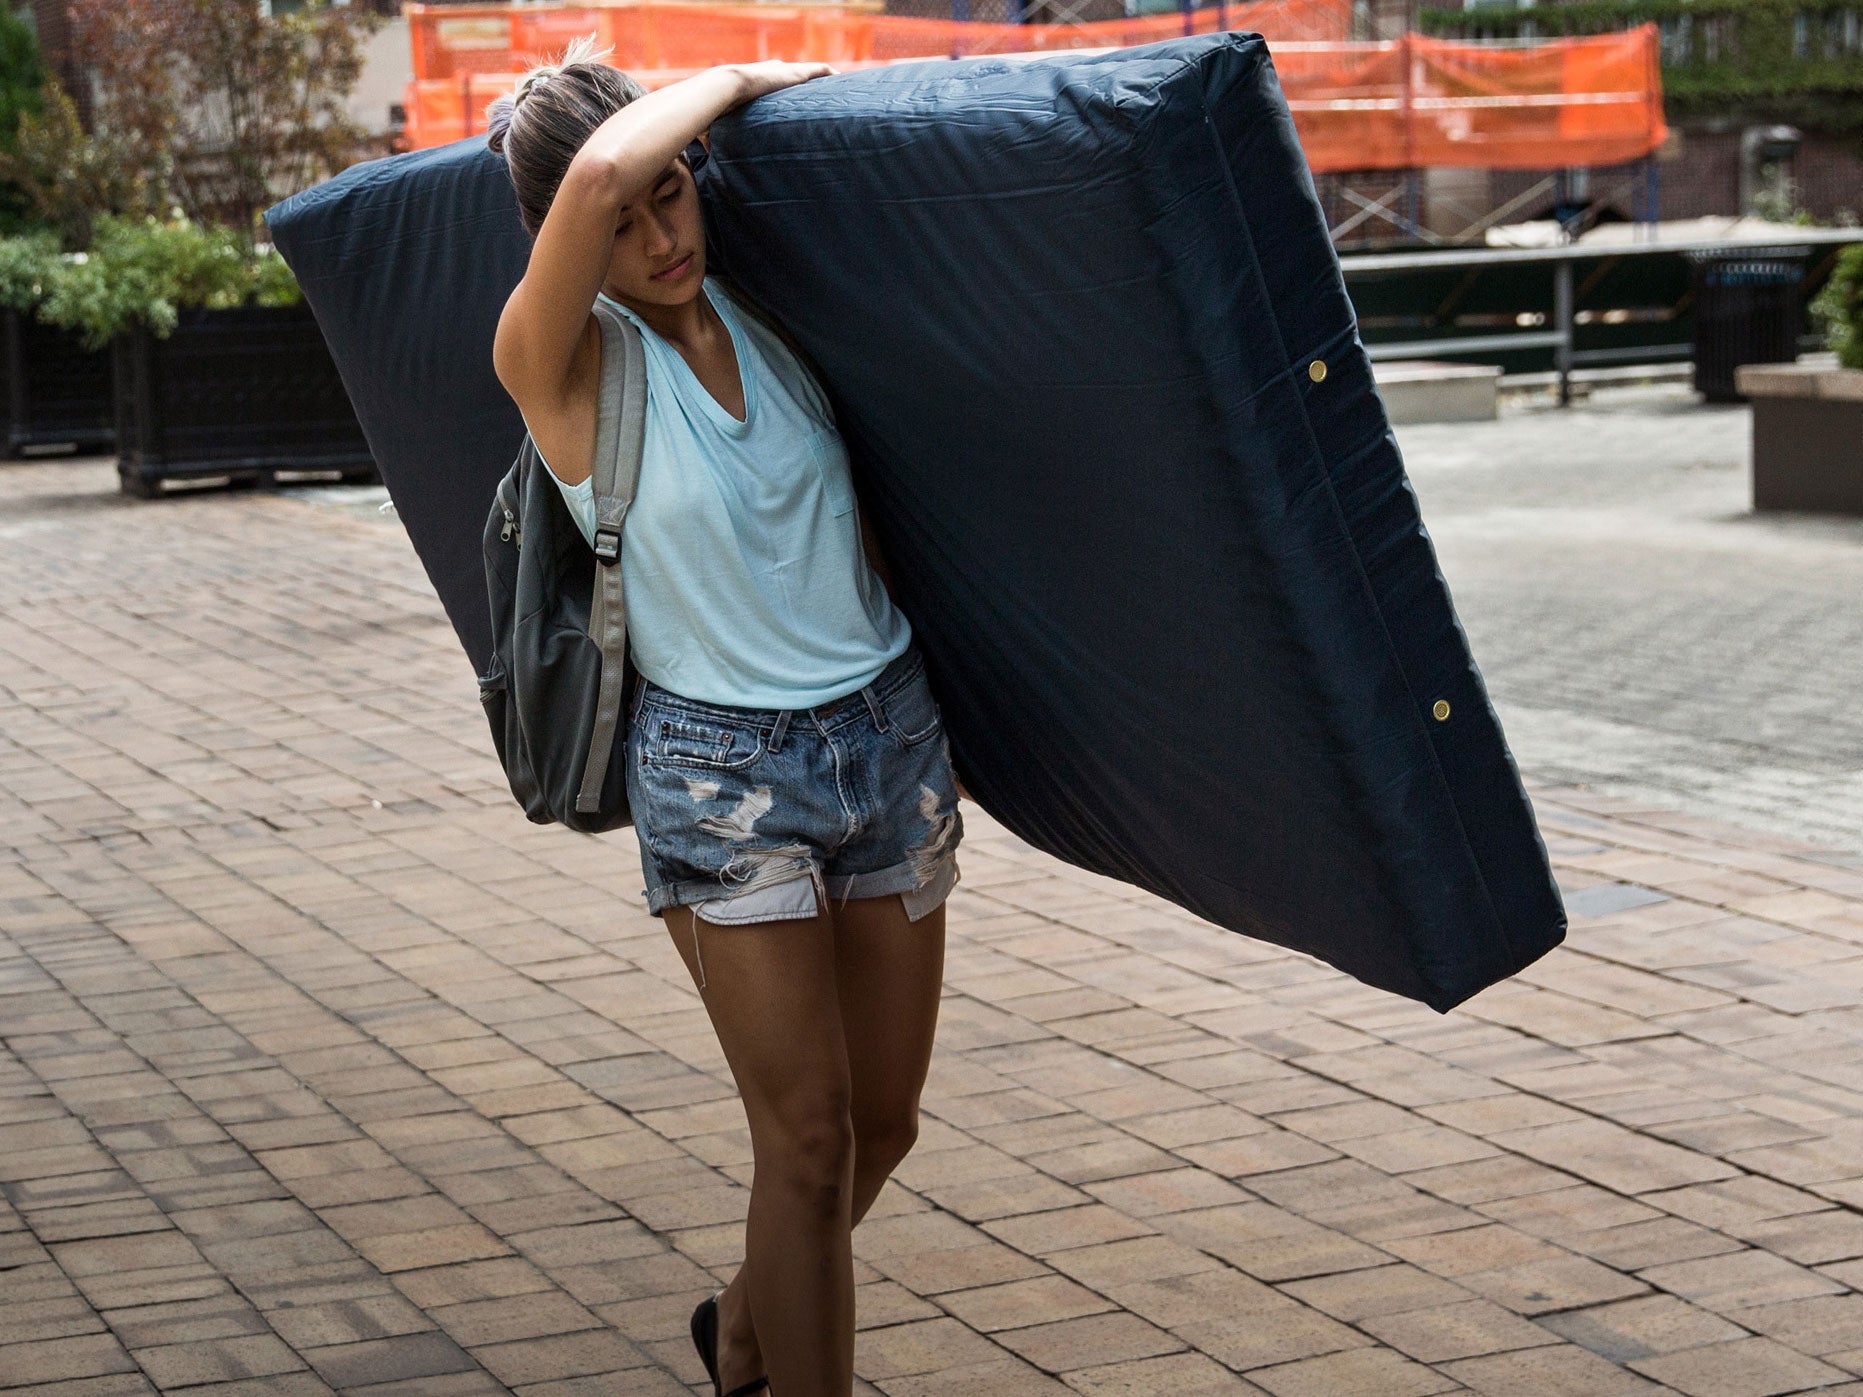 Emma Sulkowicz, carrying her mattress in protest of the university's lack of action after she reported being raped during her sophomore year